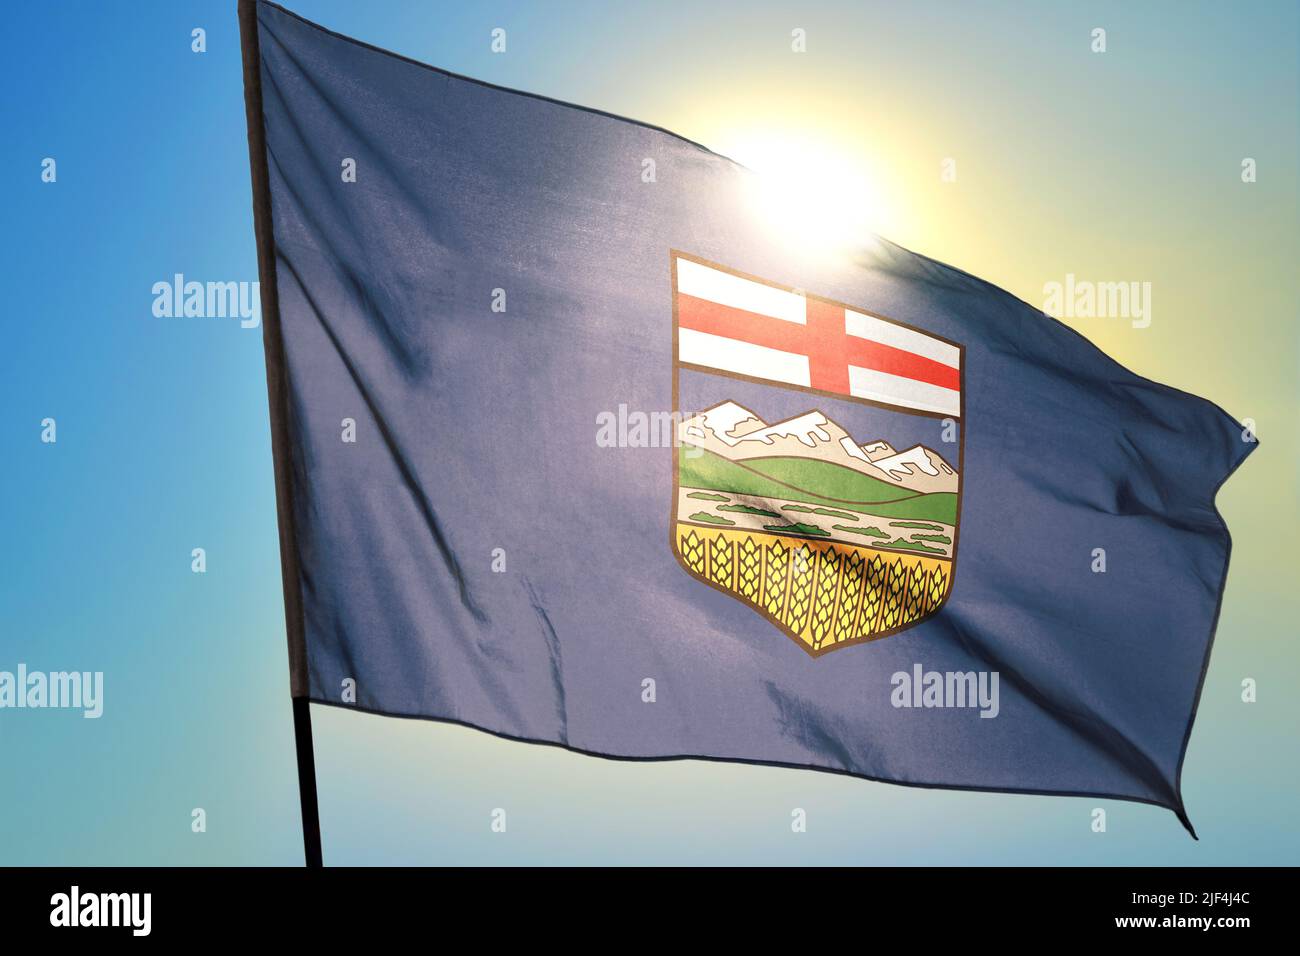 Alberta province of Canada flag waving on the wind Stock Photo